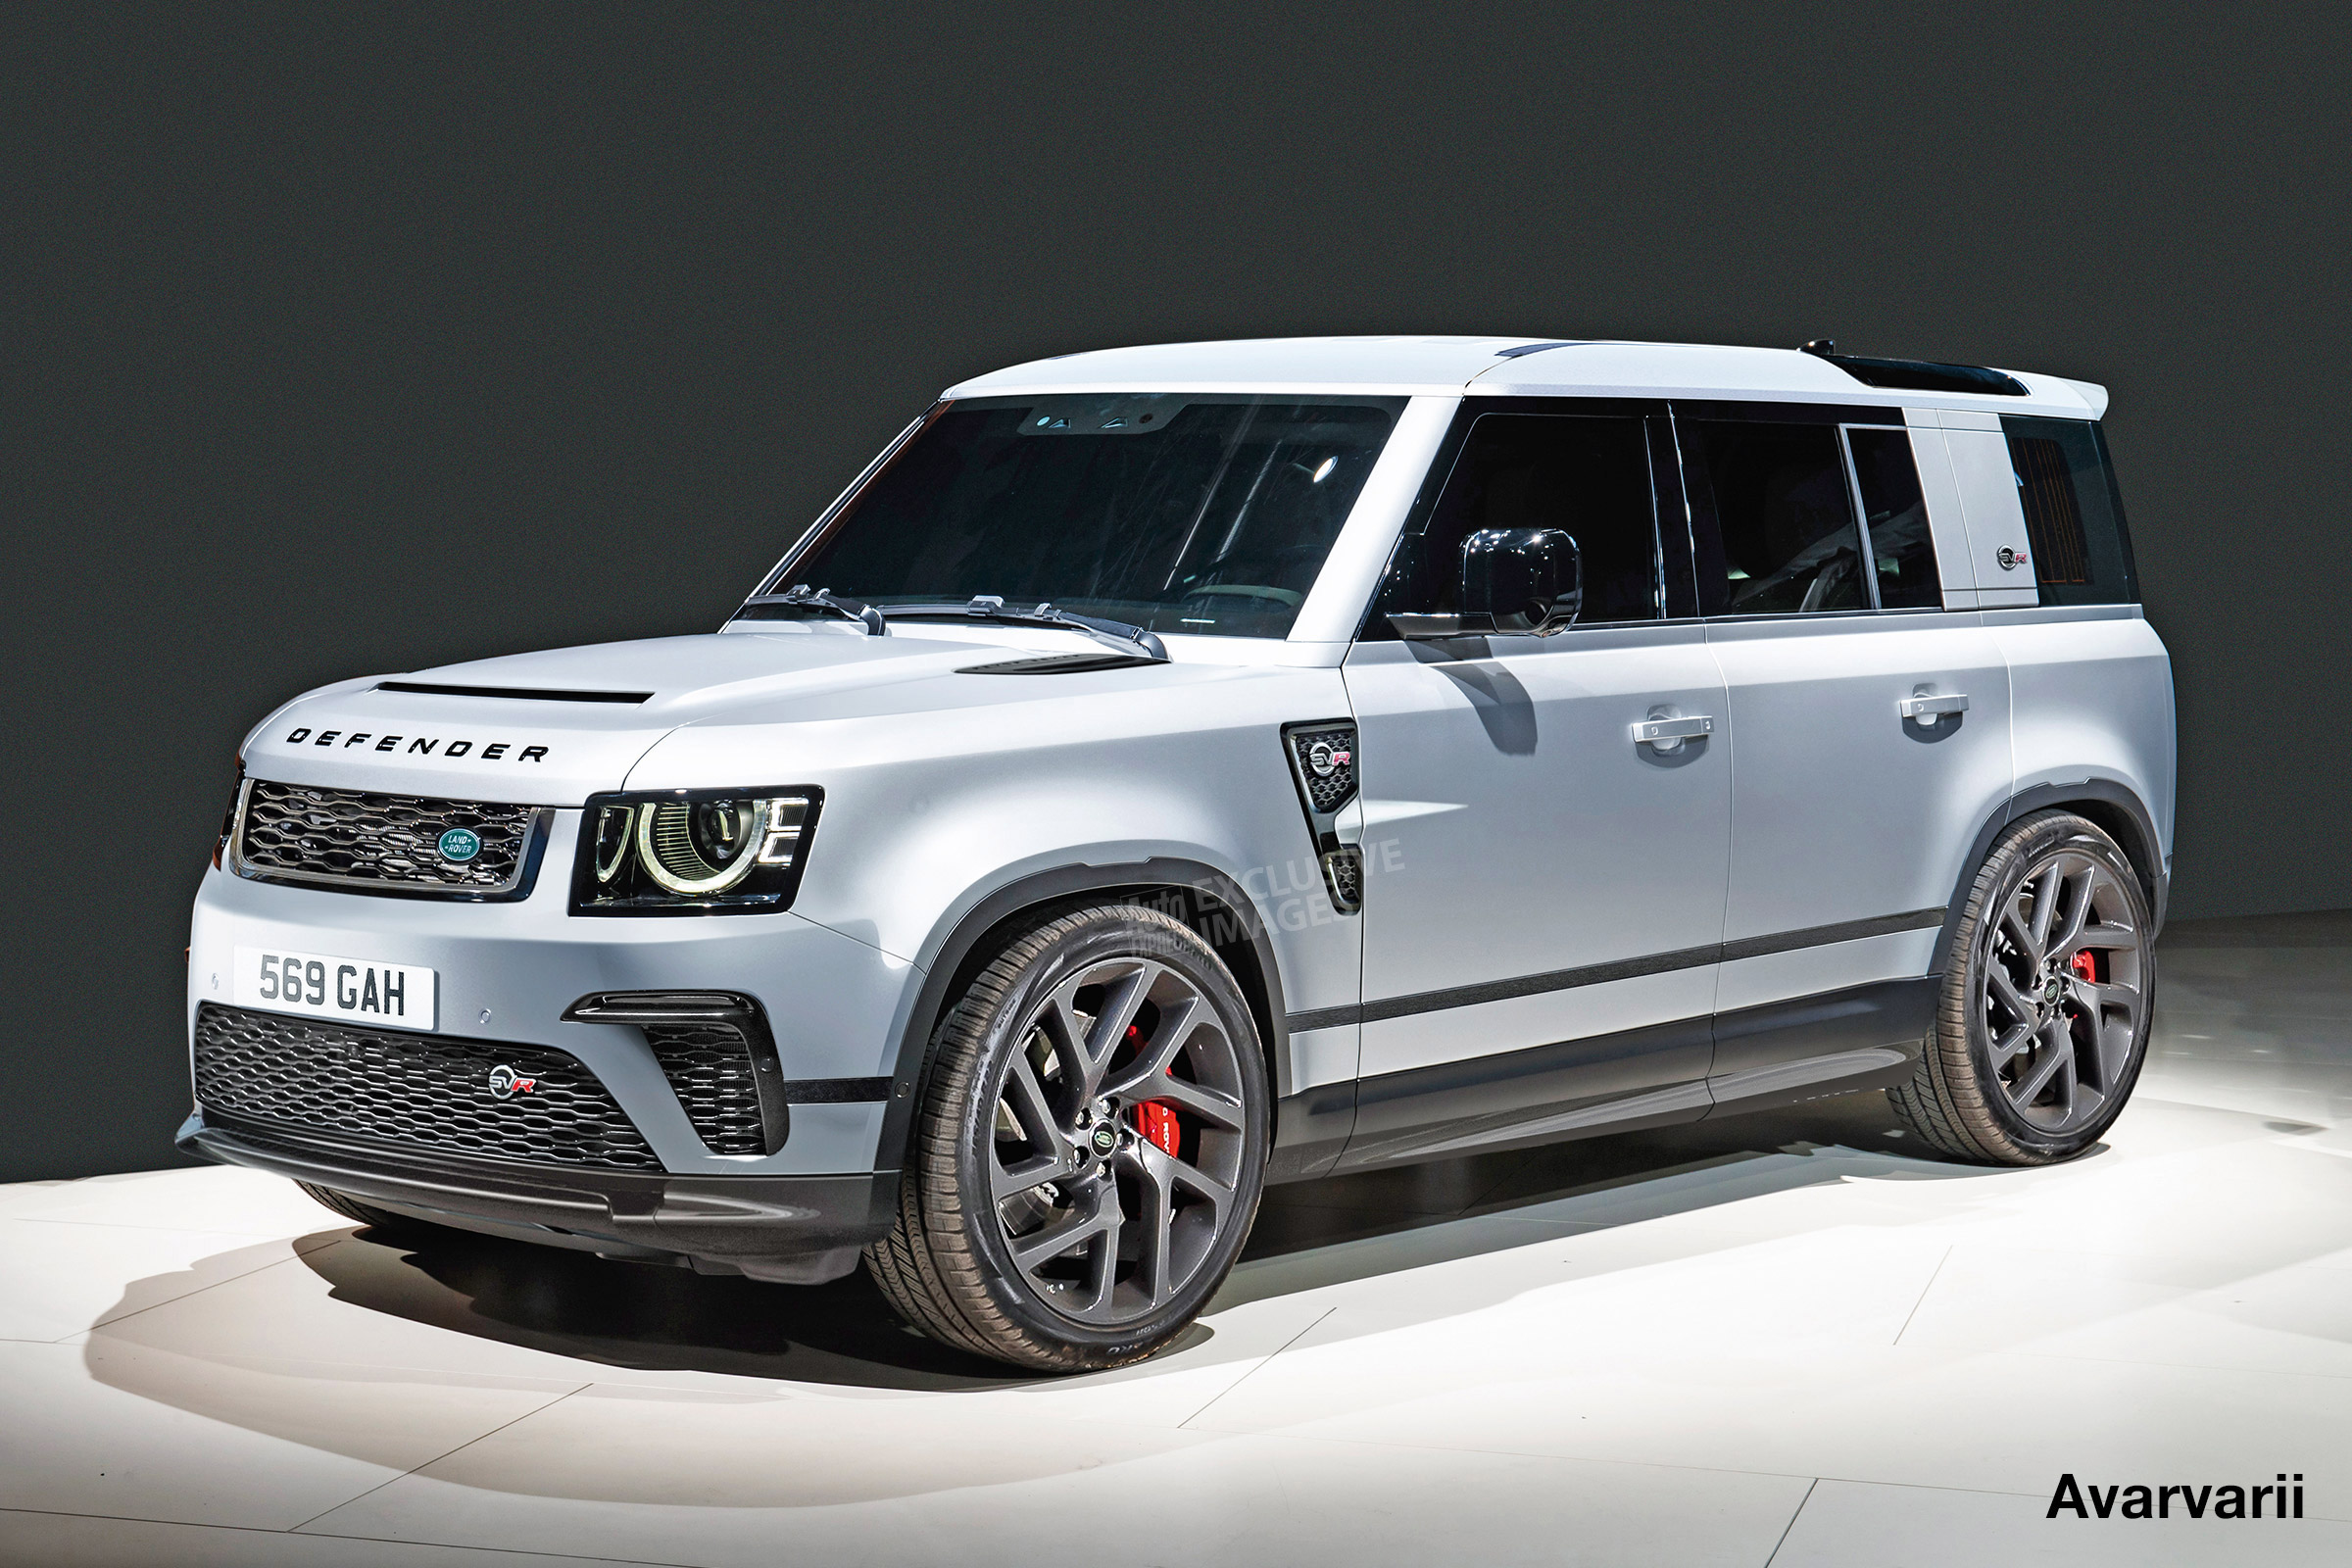 New Land Rover Defender SVR to take on MercedesAMG G 63 with 500bhp